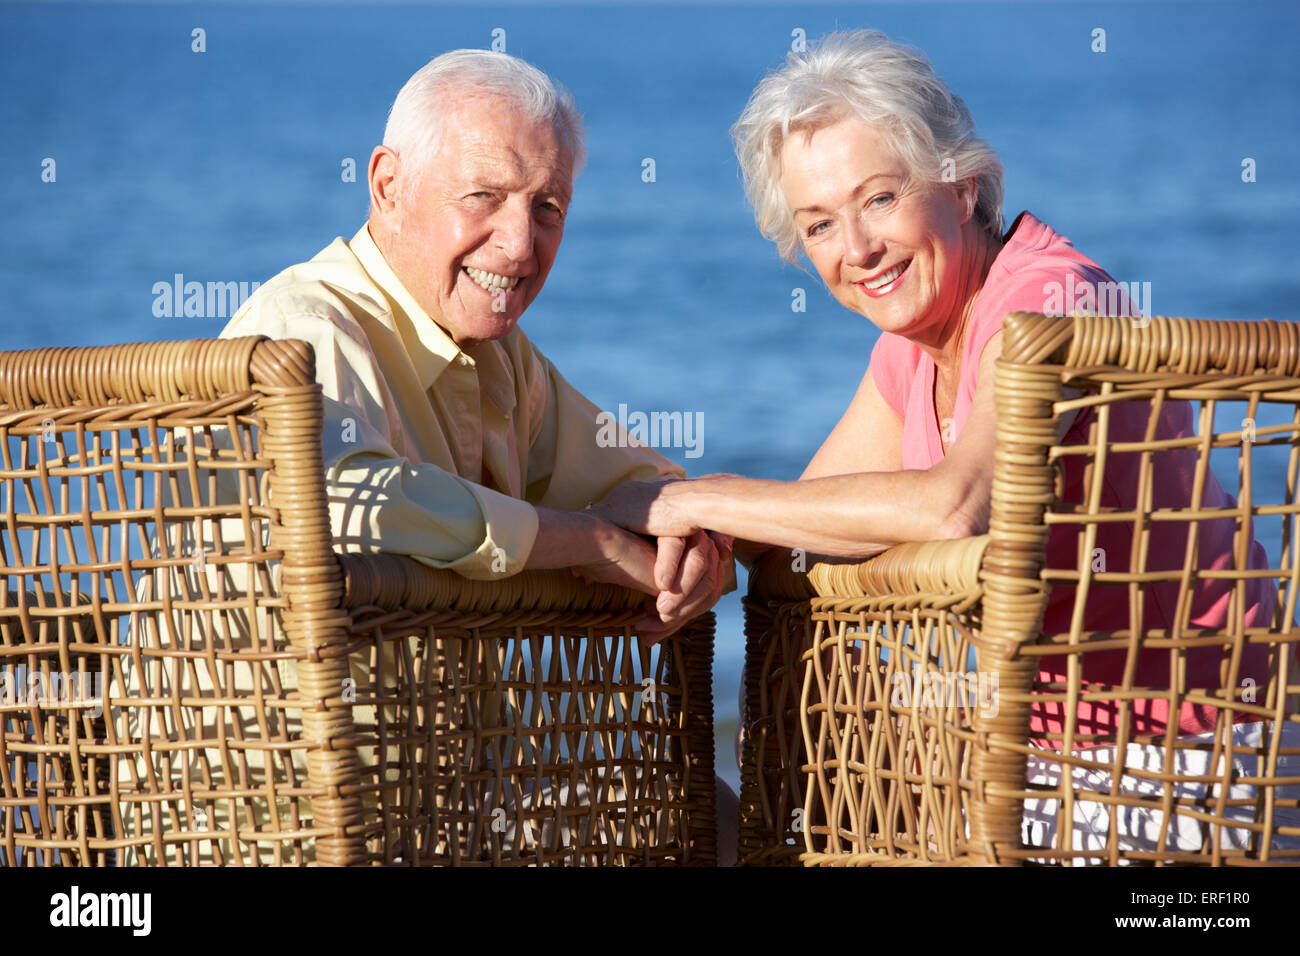 Senior Couple Sitting In Chairs Relaxing On Beach Stock Photo